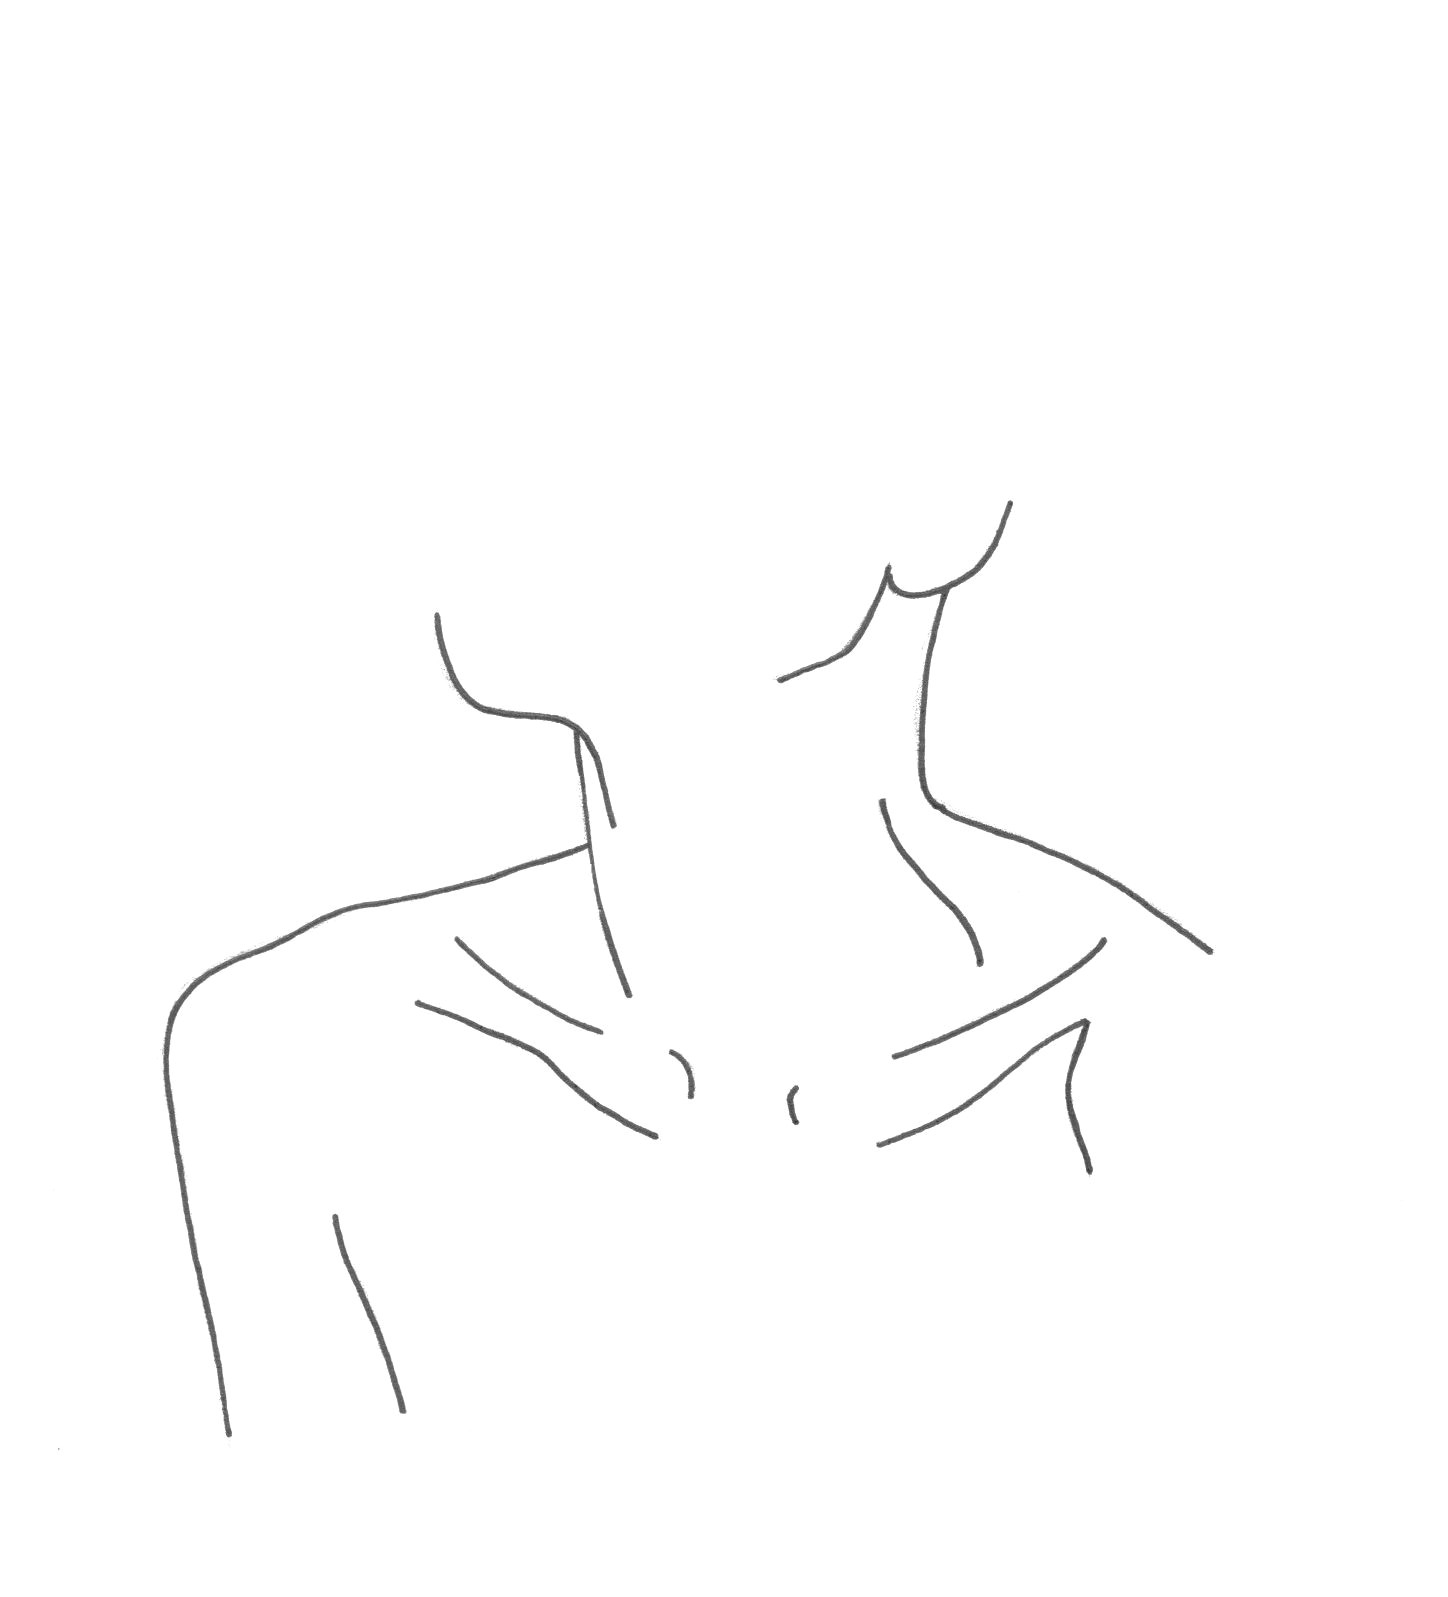 Easy Drawings with Lines Minimal Neckline Drawing thecolourstudy by thecolourstudy Line